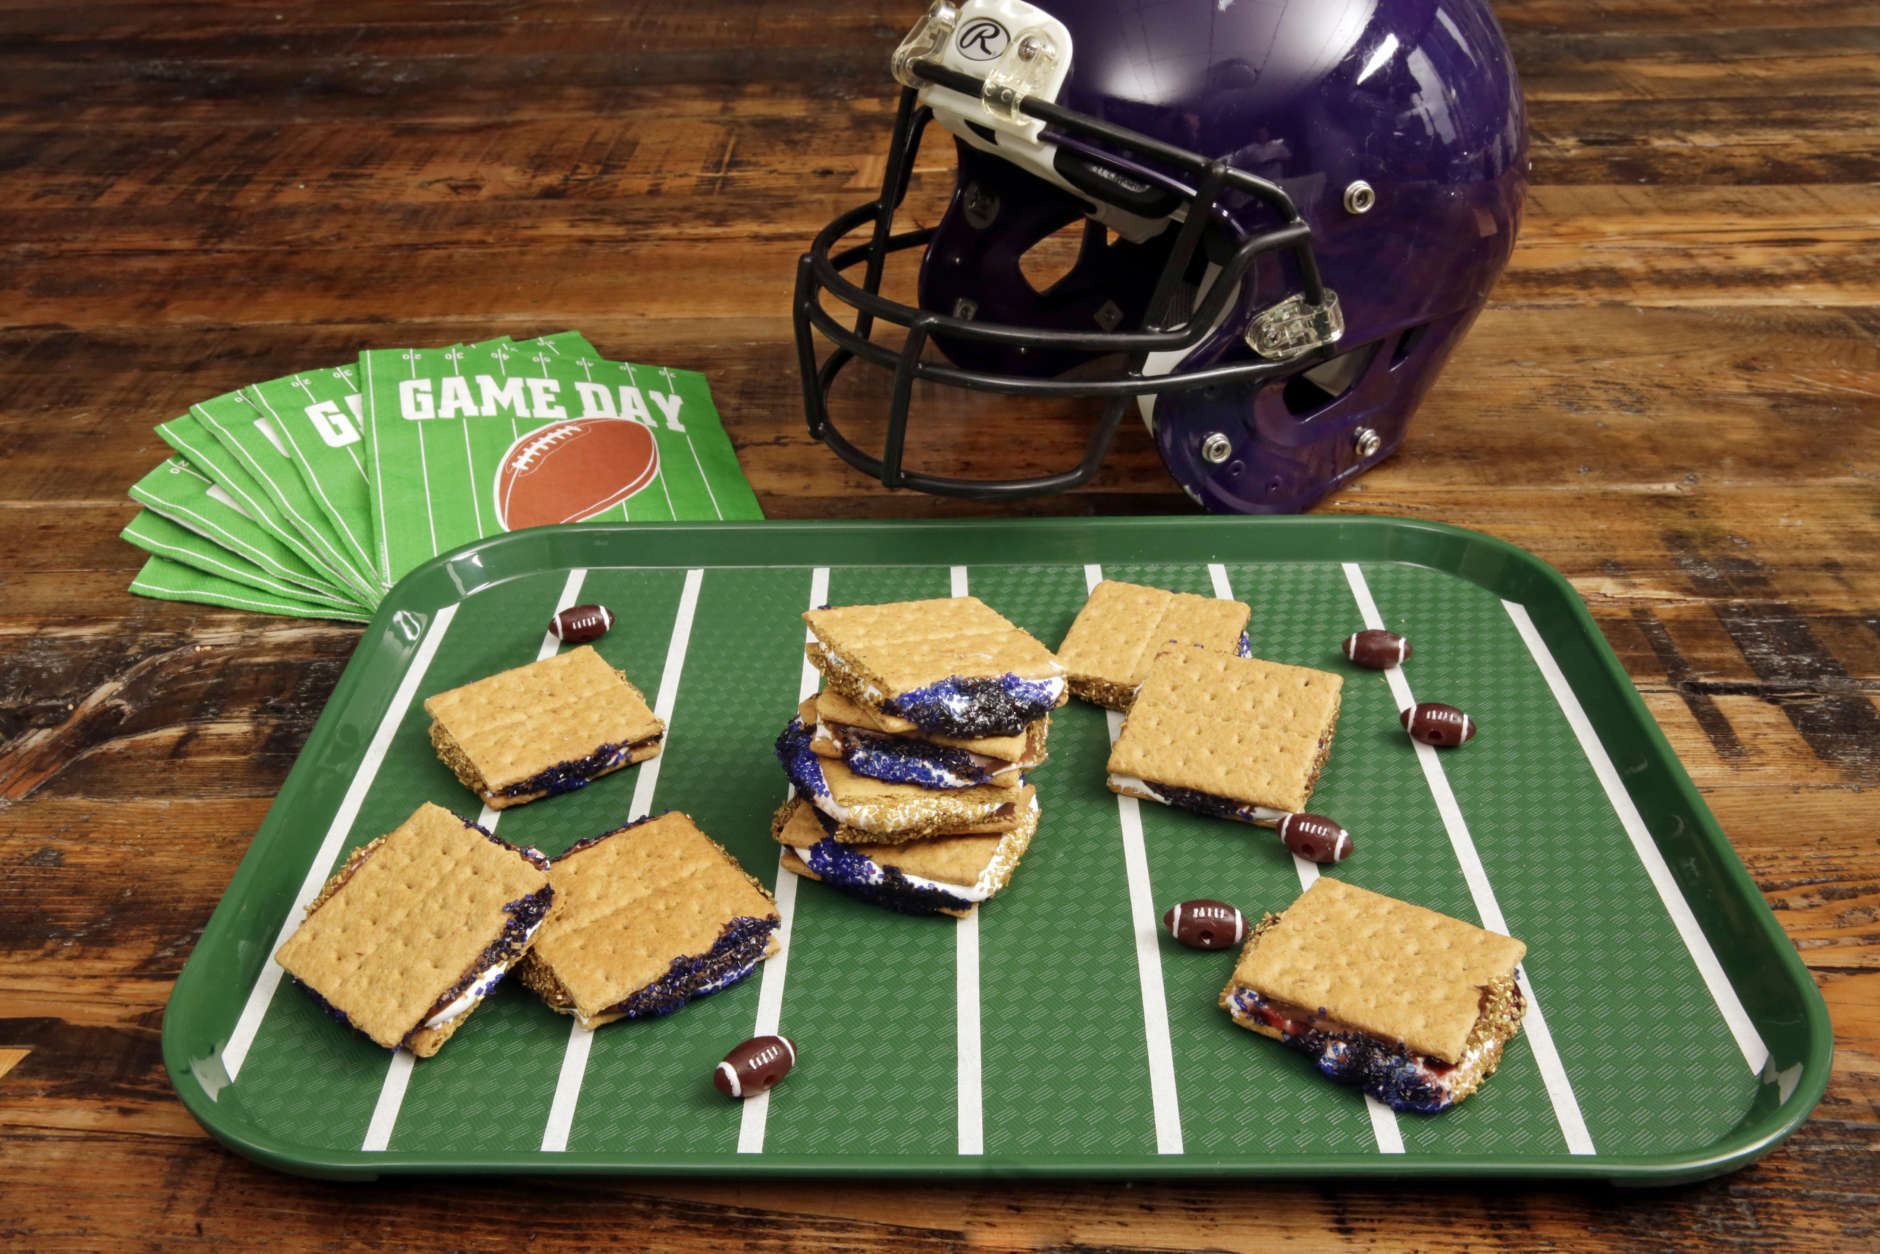 In this Dec. 8, 2016 photo at the Institute of Culinary Education in New York, Game Day S'mores are shown, from a recipe by Elizabeth Karmel. These sweet treats are a riff on the very popular summer campfire s'mores. If you love marshmallow and chocolate, and have fun nostalgic memories of campfire s'mores, these simpler "no-bake" Game Day S'mores will delight you. (AP Photo/Richard Drew)